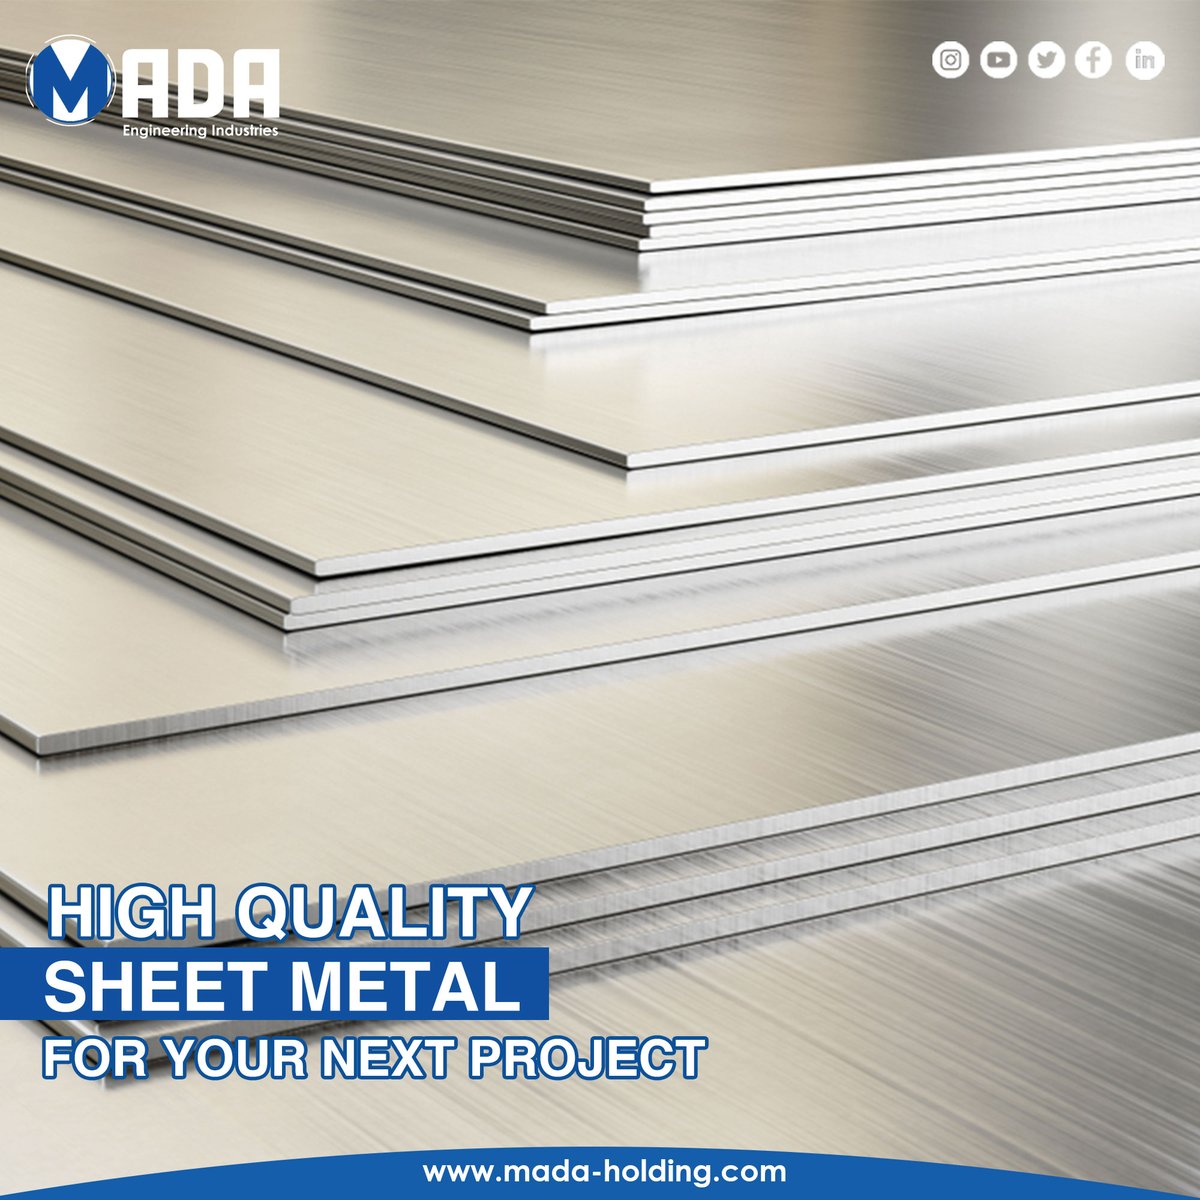 We Supply the Best Quality of #Sheet_metal to Complete your project with the best efficiency and Reliability 👌🏨

Don't waste your time and Contact us now 📲
01011954033

#MADA_HOLDING
#MADA_Engineering_Industries
#METAL_PRODUCTS_PORTFOLIO
#steel #steelproducts #manufacturing